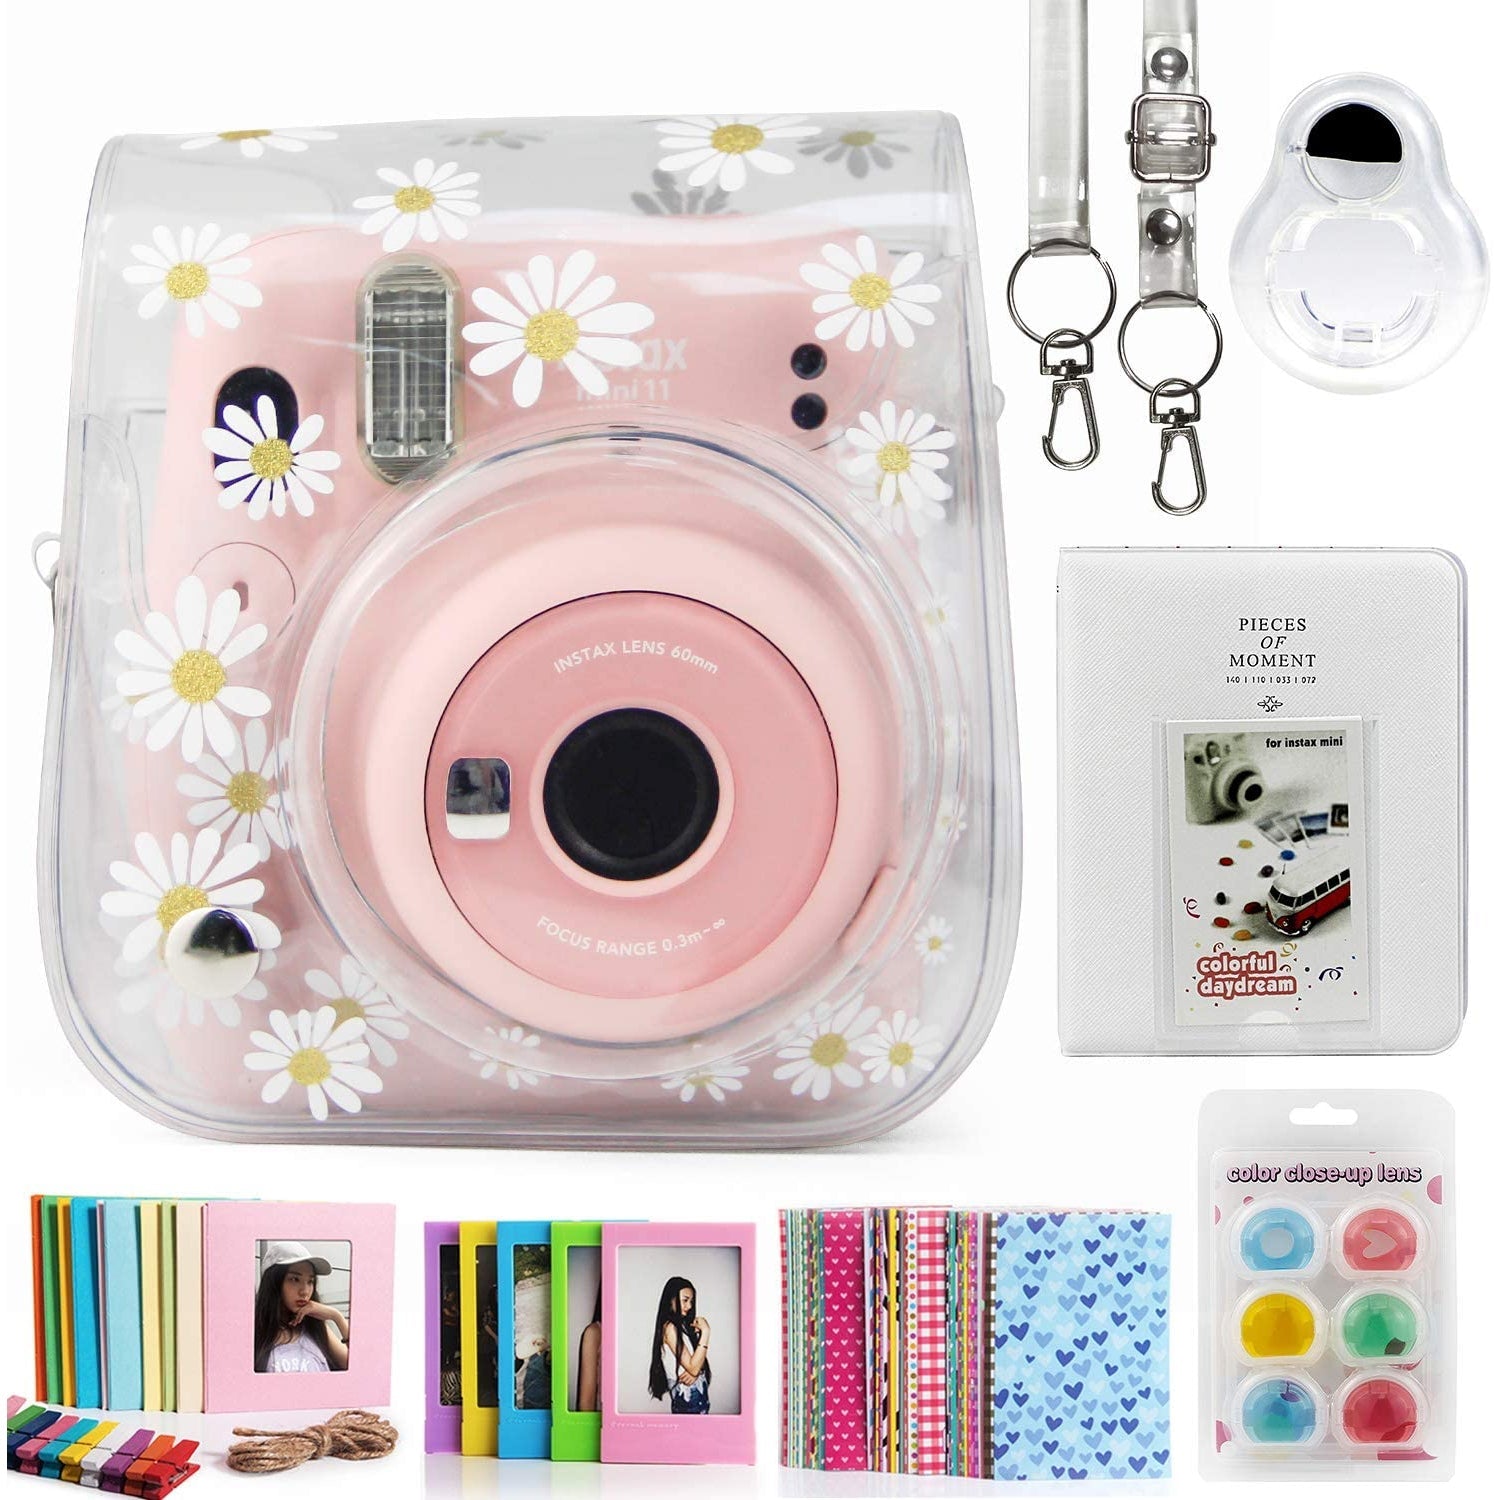 Zenko Compatible Mini 11 Camera Case Bundle with Album, Filters and Other Accessories for Fujifilm Instax Mini 11 (Transparent Daisy 1, 7 Items)